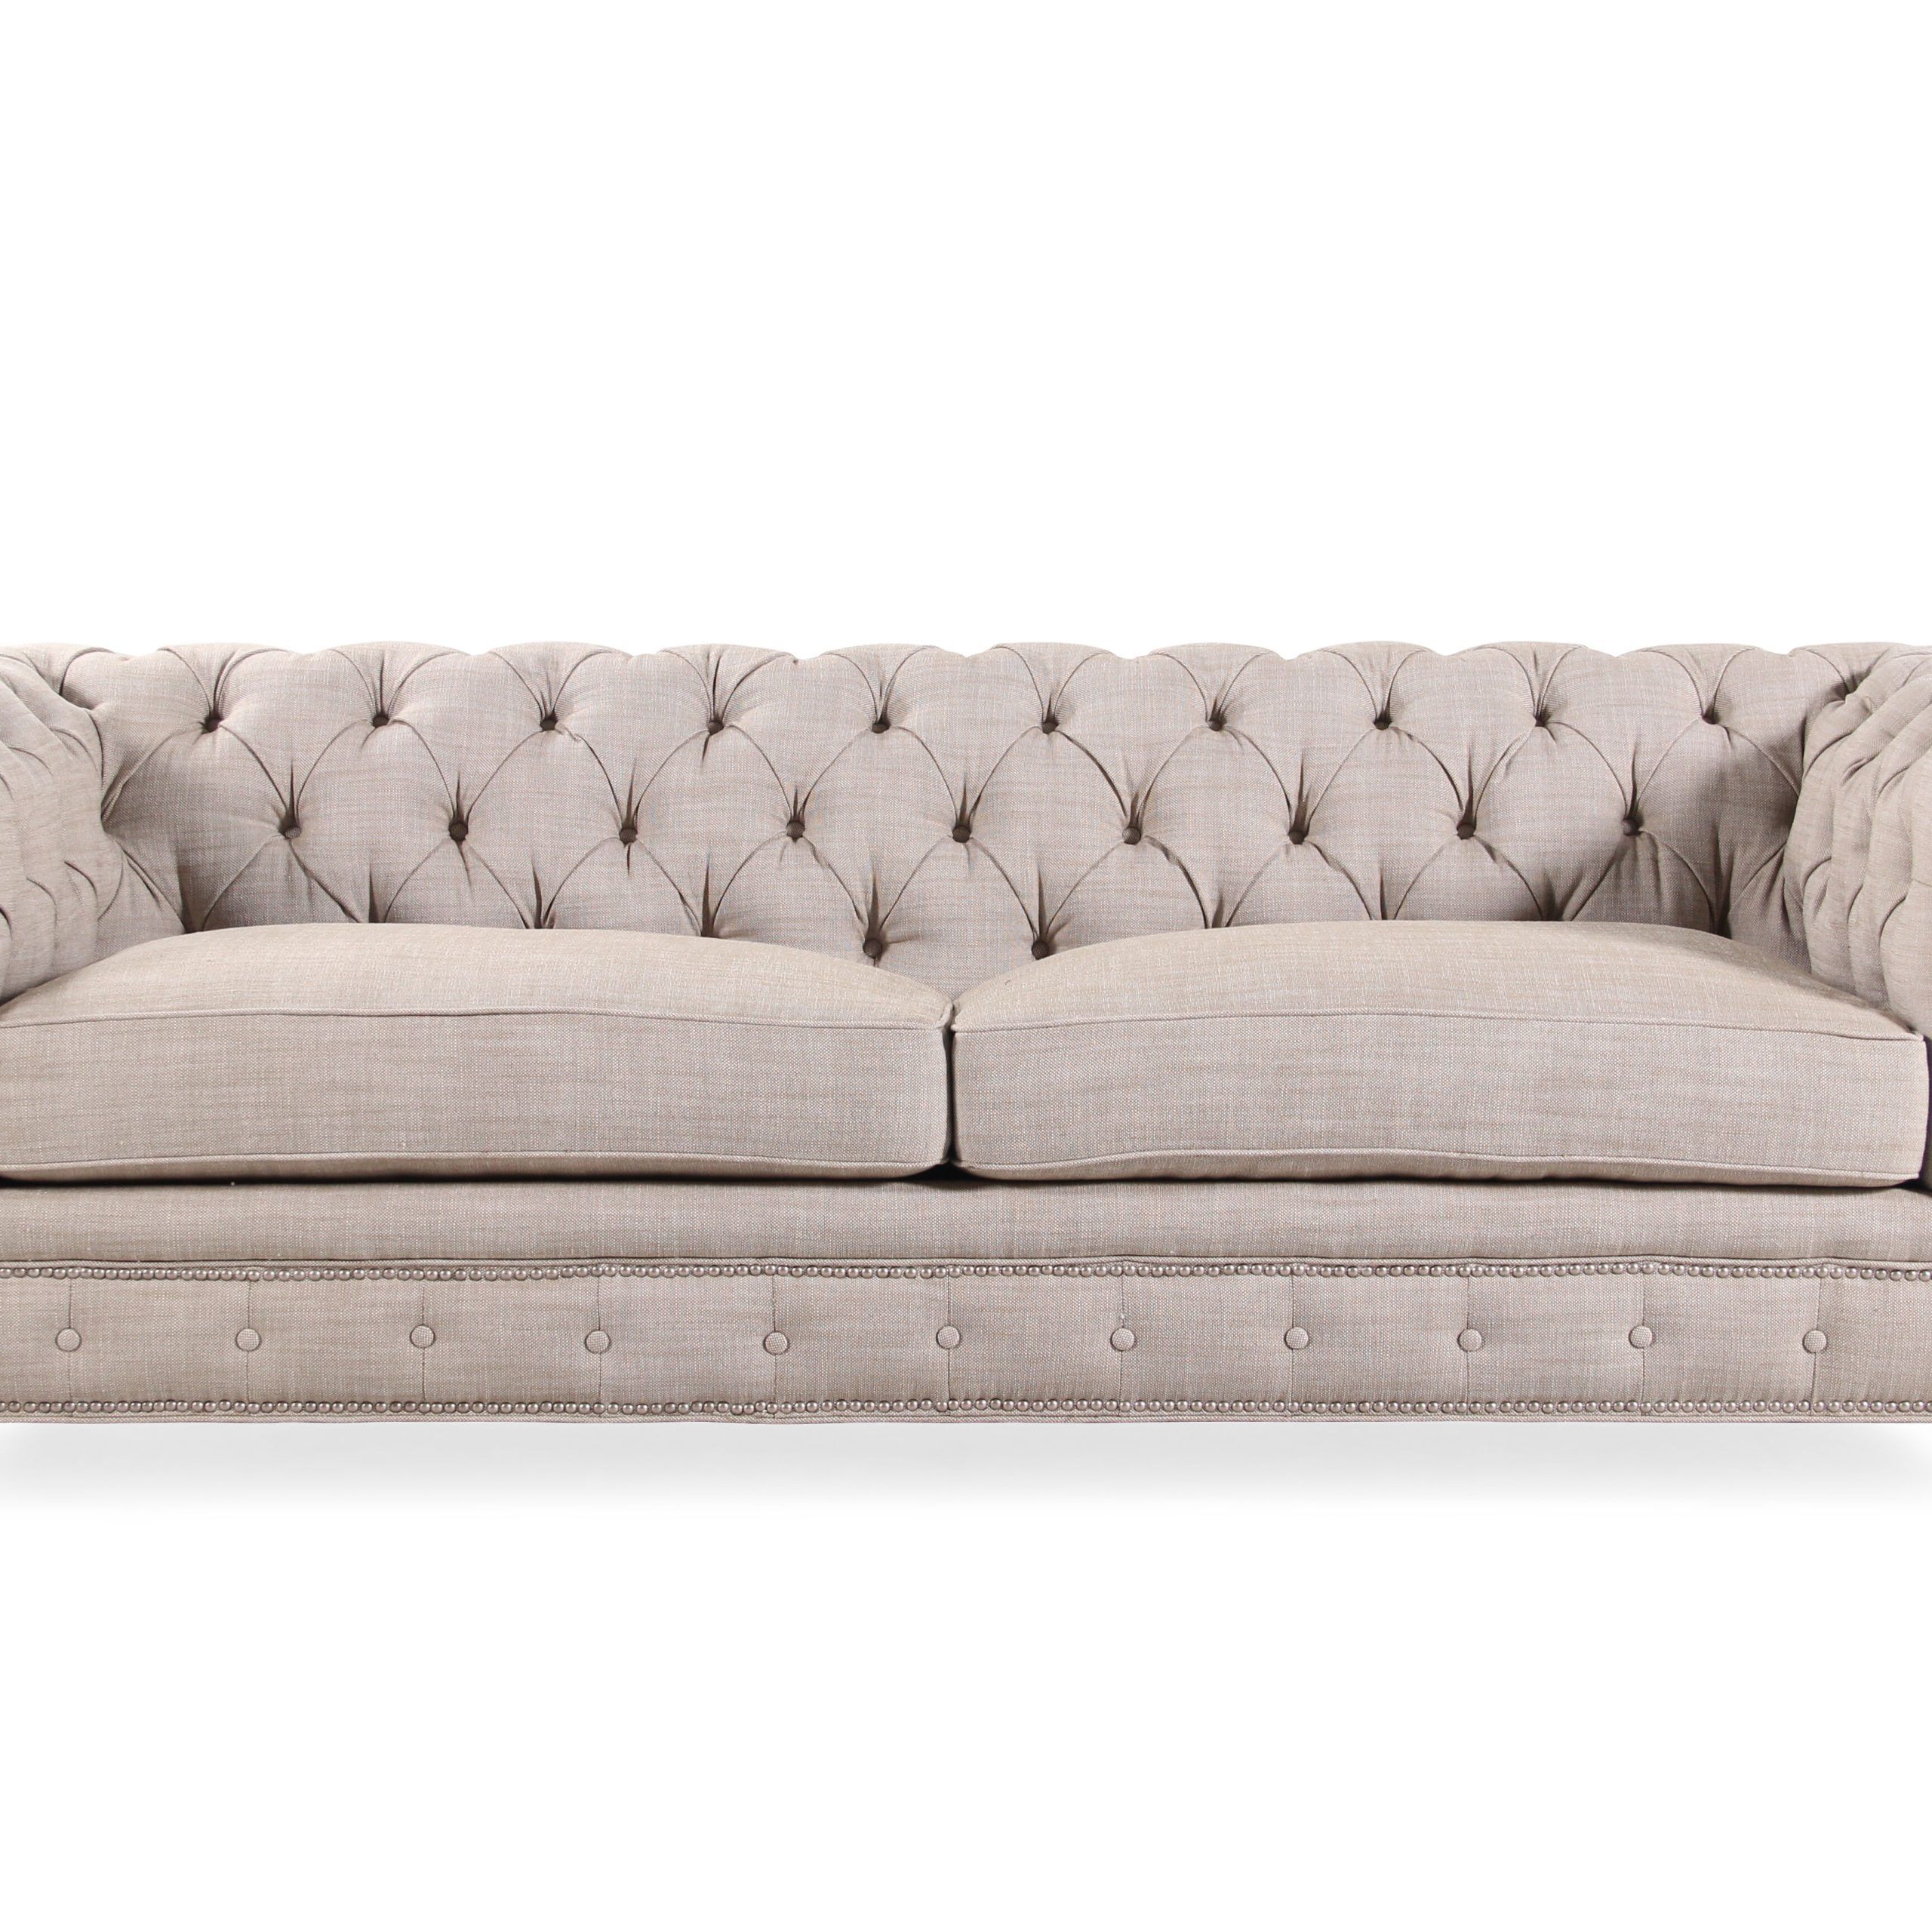 Traditional Button Tufted 102" Sofa In Cream | Mathis Brothers Furniture Inside Sofas In Cream (Gallery 4 of 20)